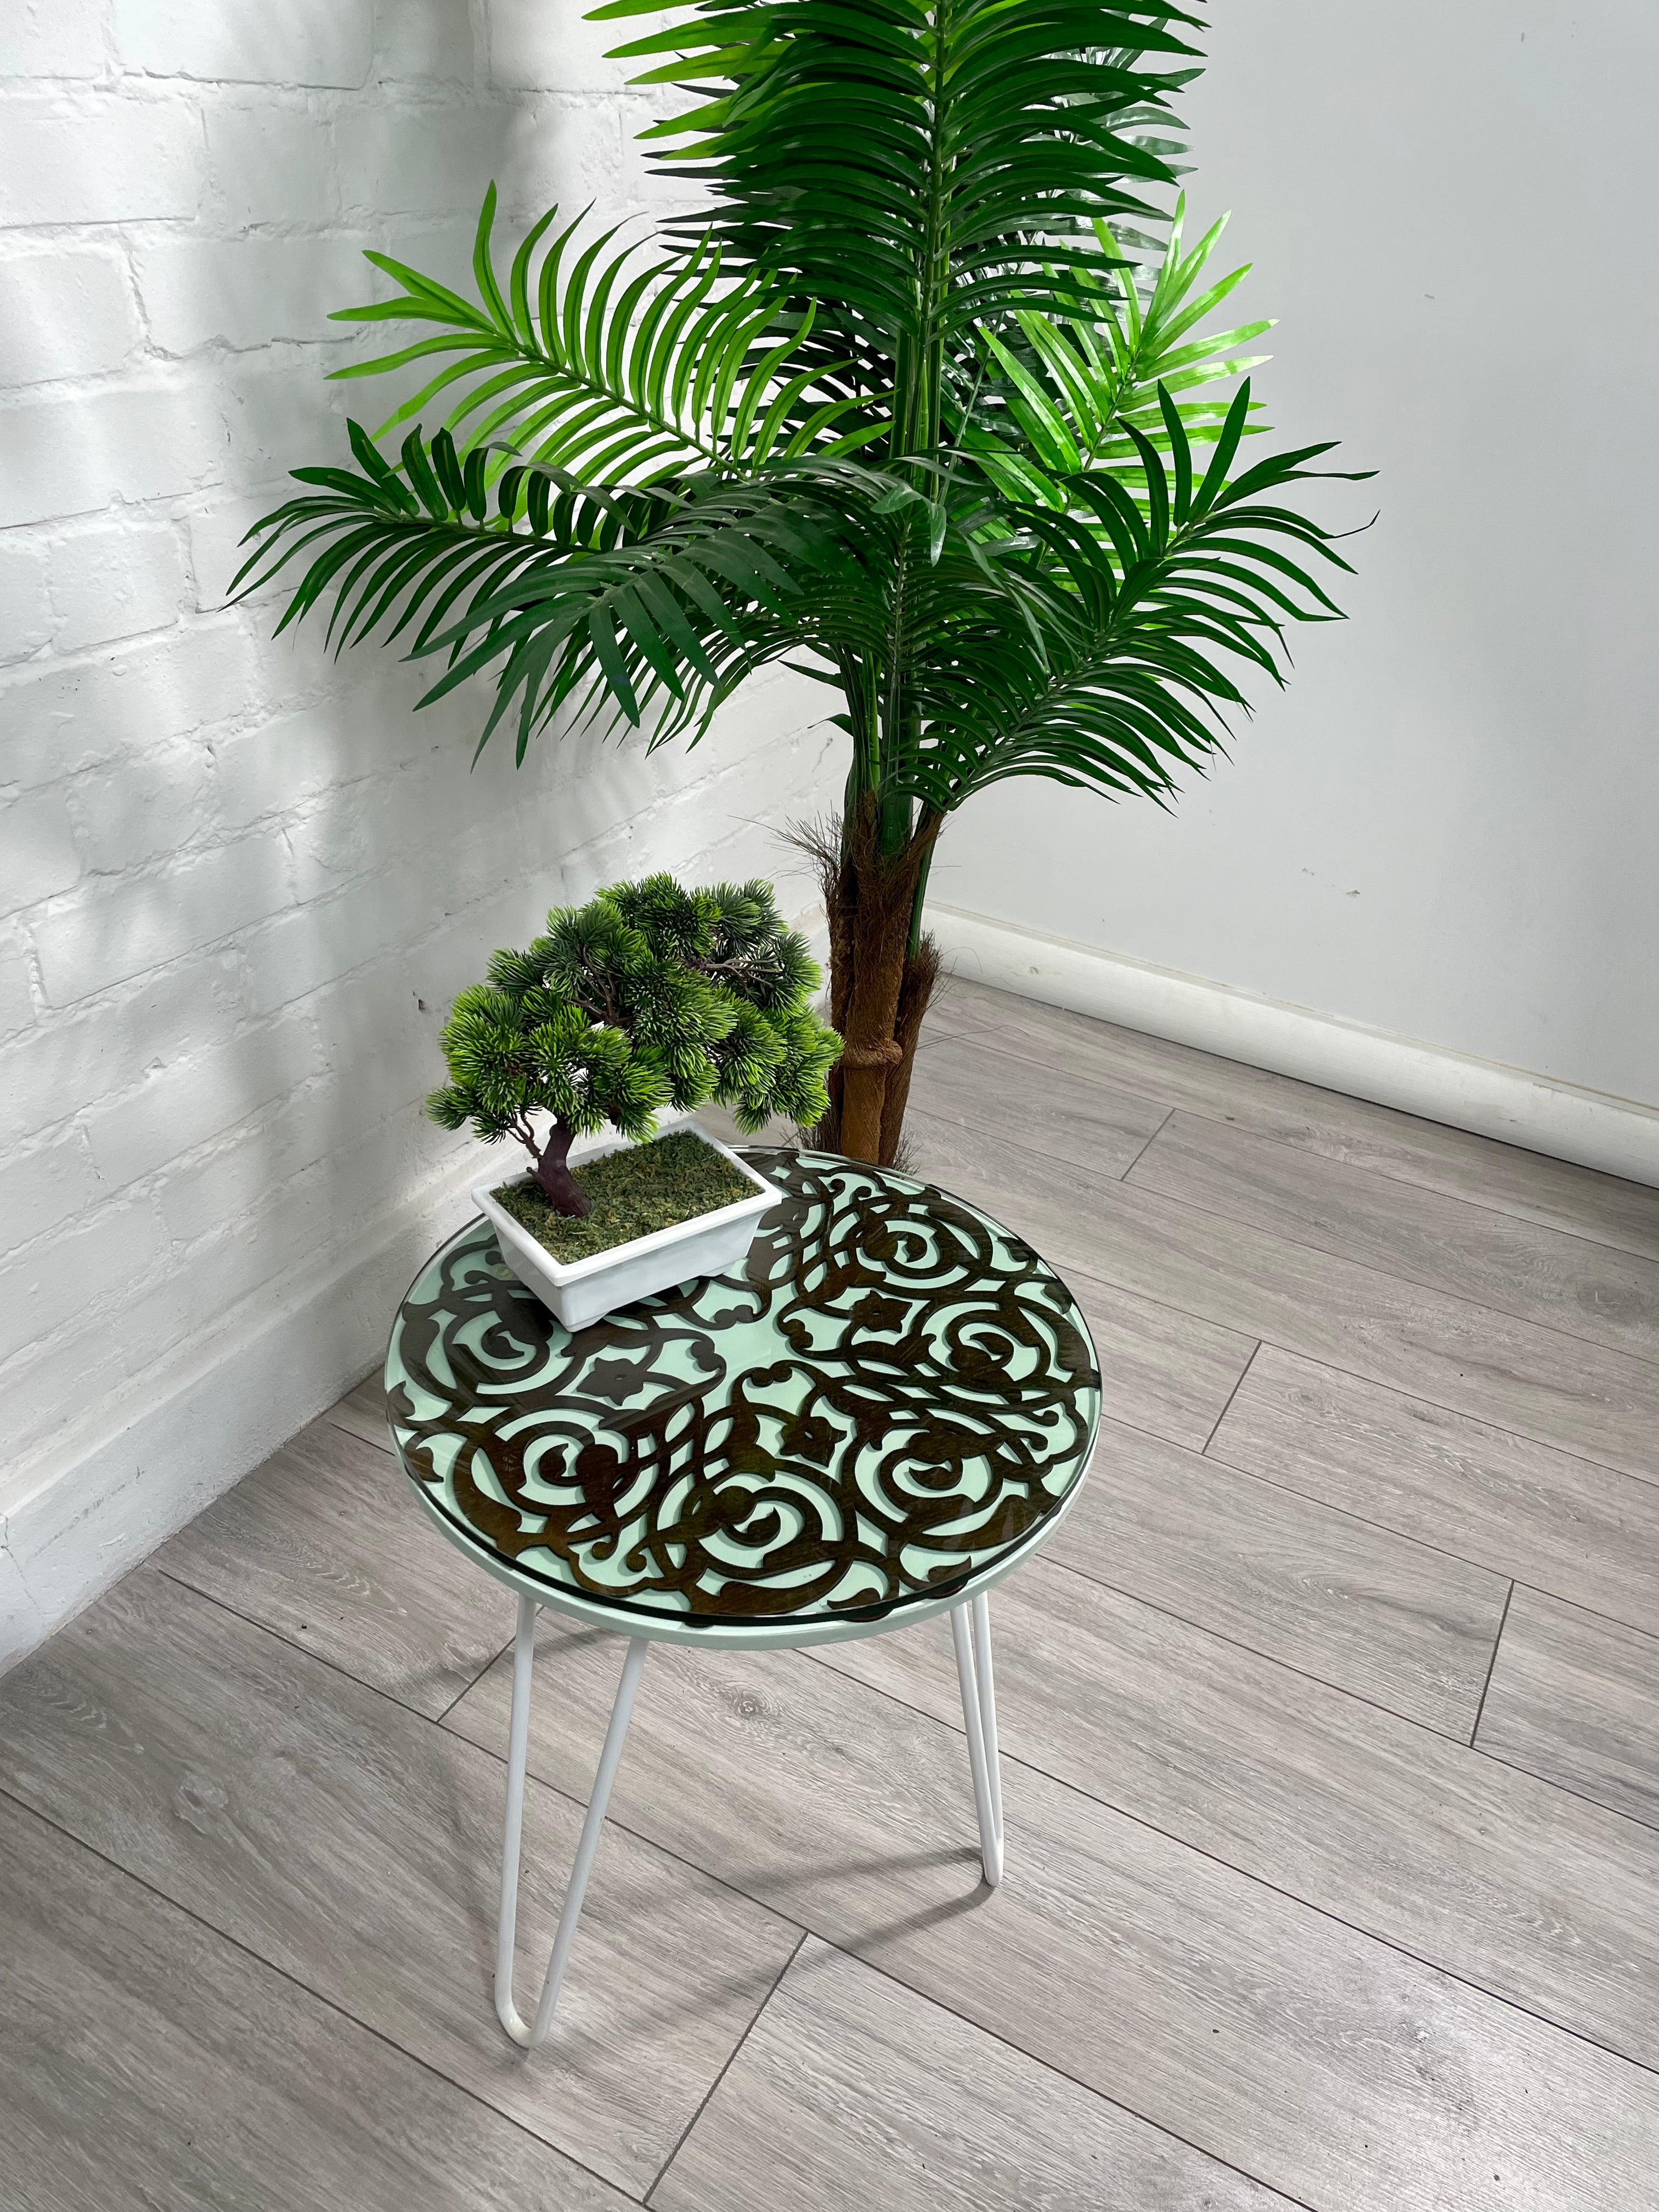 Green Pastel and Walnut finish side table with Arabesque fret work, glass top and Pin legs